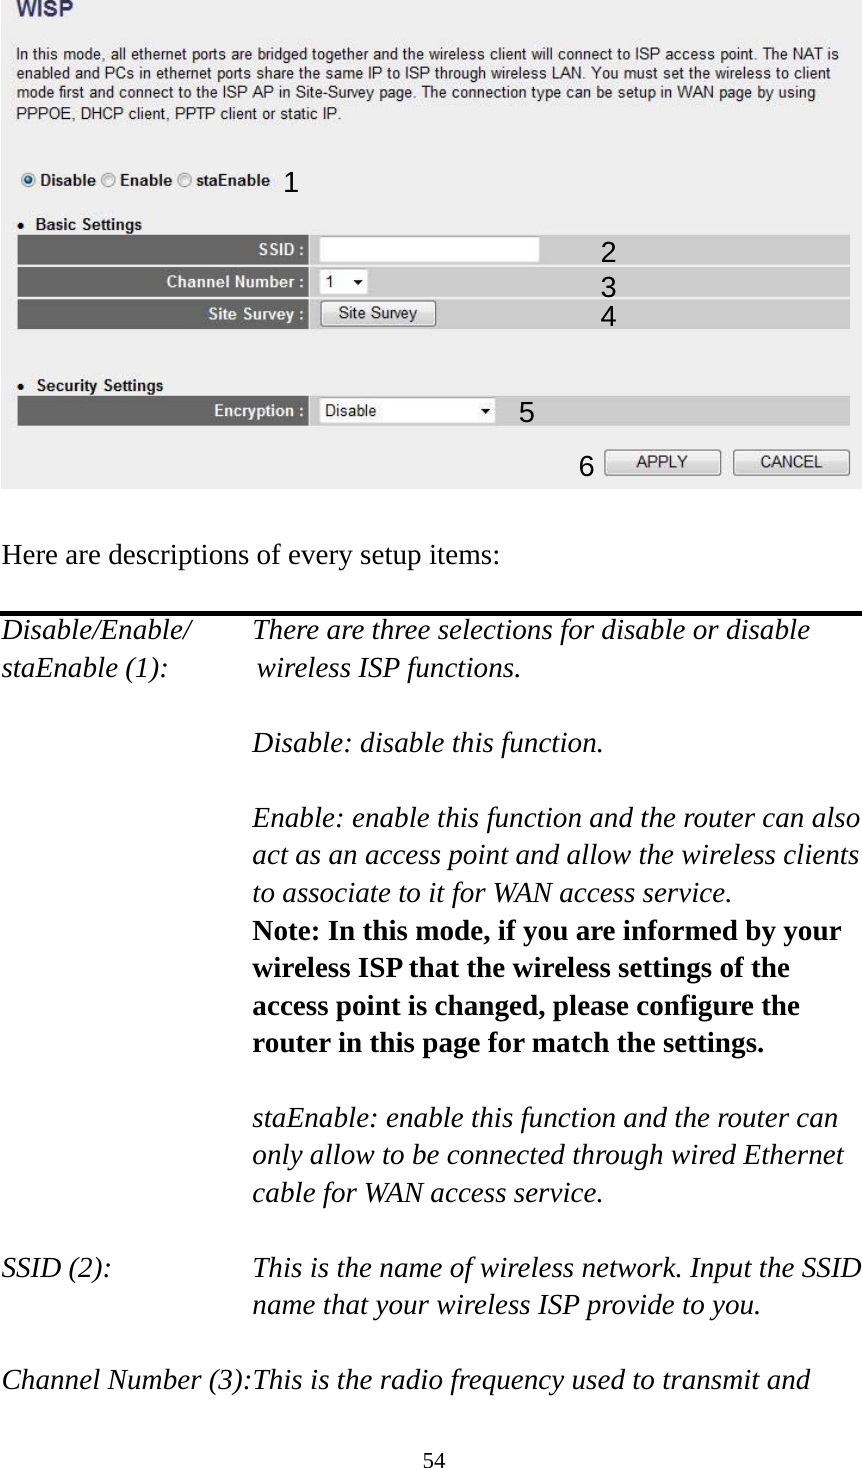 54   Here are descriptions of every setup items:  Disable/Enable/    There are three selections for disable or disable   staEnable (1):      wireless ISP functions.  Disable: disable this function.  Enable: enable this function and the router can also act as an access point and allow the wireless clients to associate to it for WAN access service. Note: In this mode, if you are informed by your wireless ISP that the wireless settings of the access point is changed, please configure the router in this page for match the settings.  staEnable: enable this function and the router can only allow to be connected through wired Ethernet cable for WAN access service.  SSID (2):    This is the name of wireless network. Input the SSID name that your wireless ISP provide to you.  Channel Number (3):This is the radio frequency used to transmit and 1 2345 6